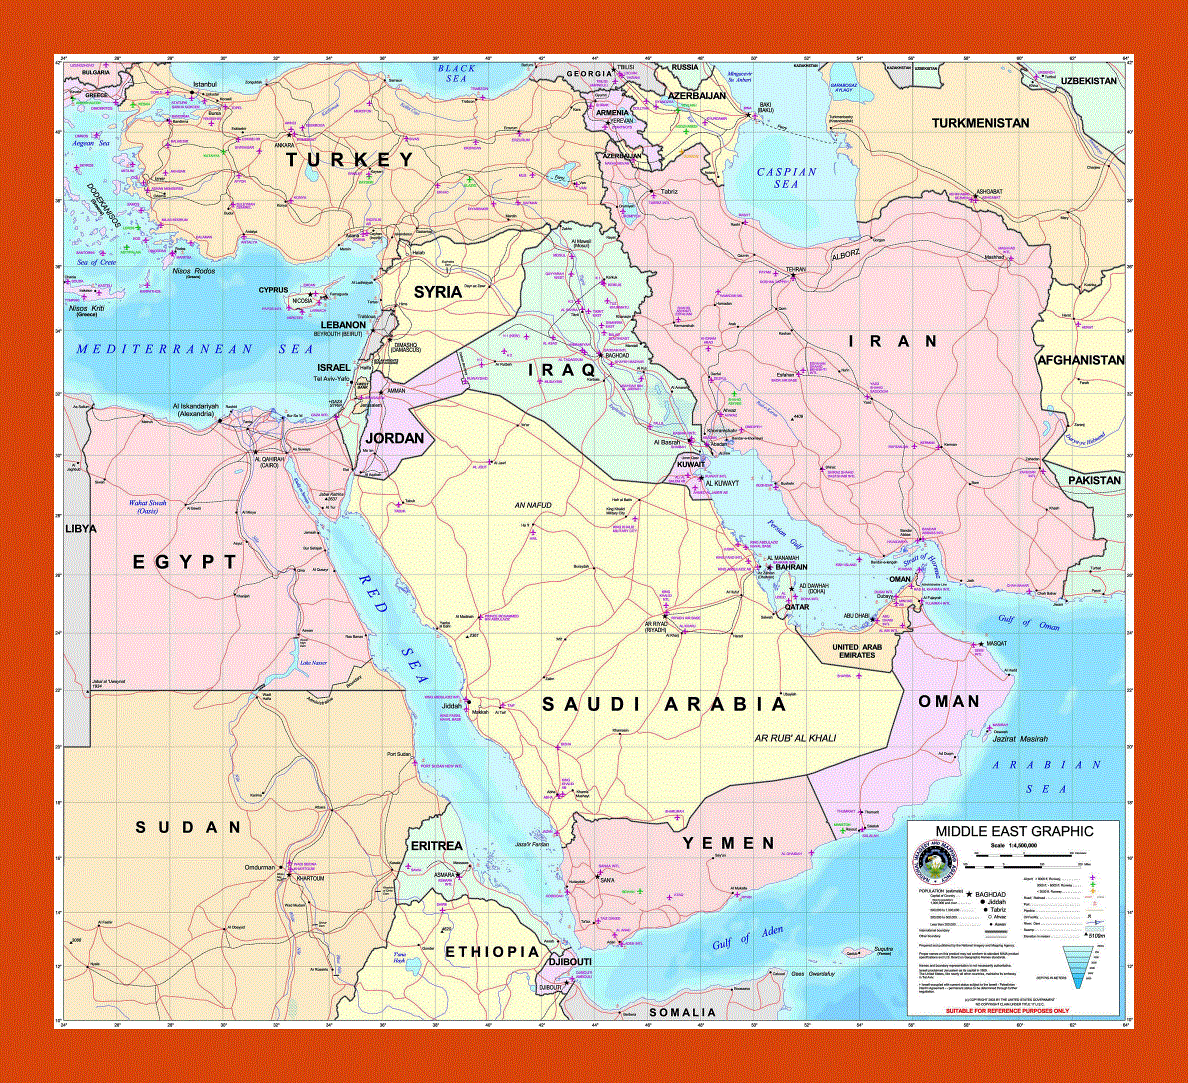 Middle East graphic map - 2003